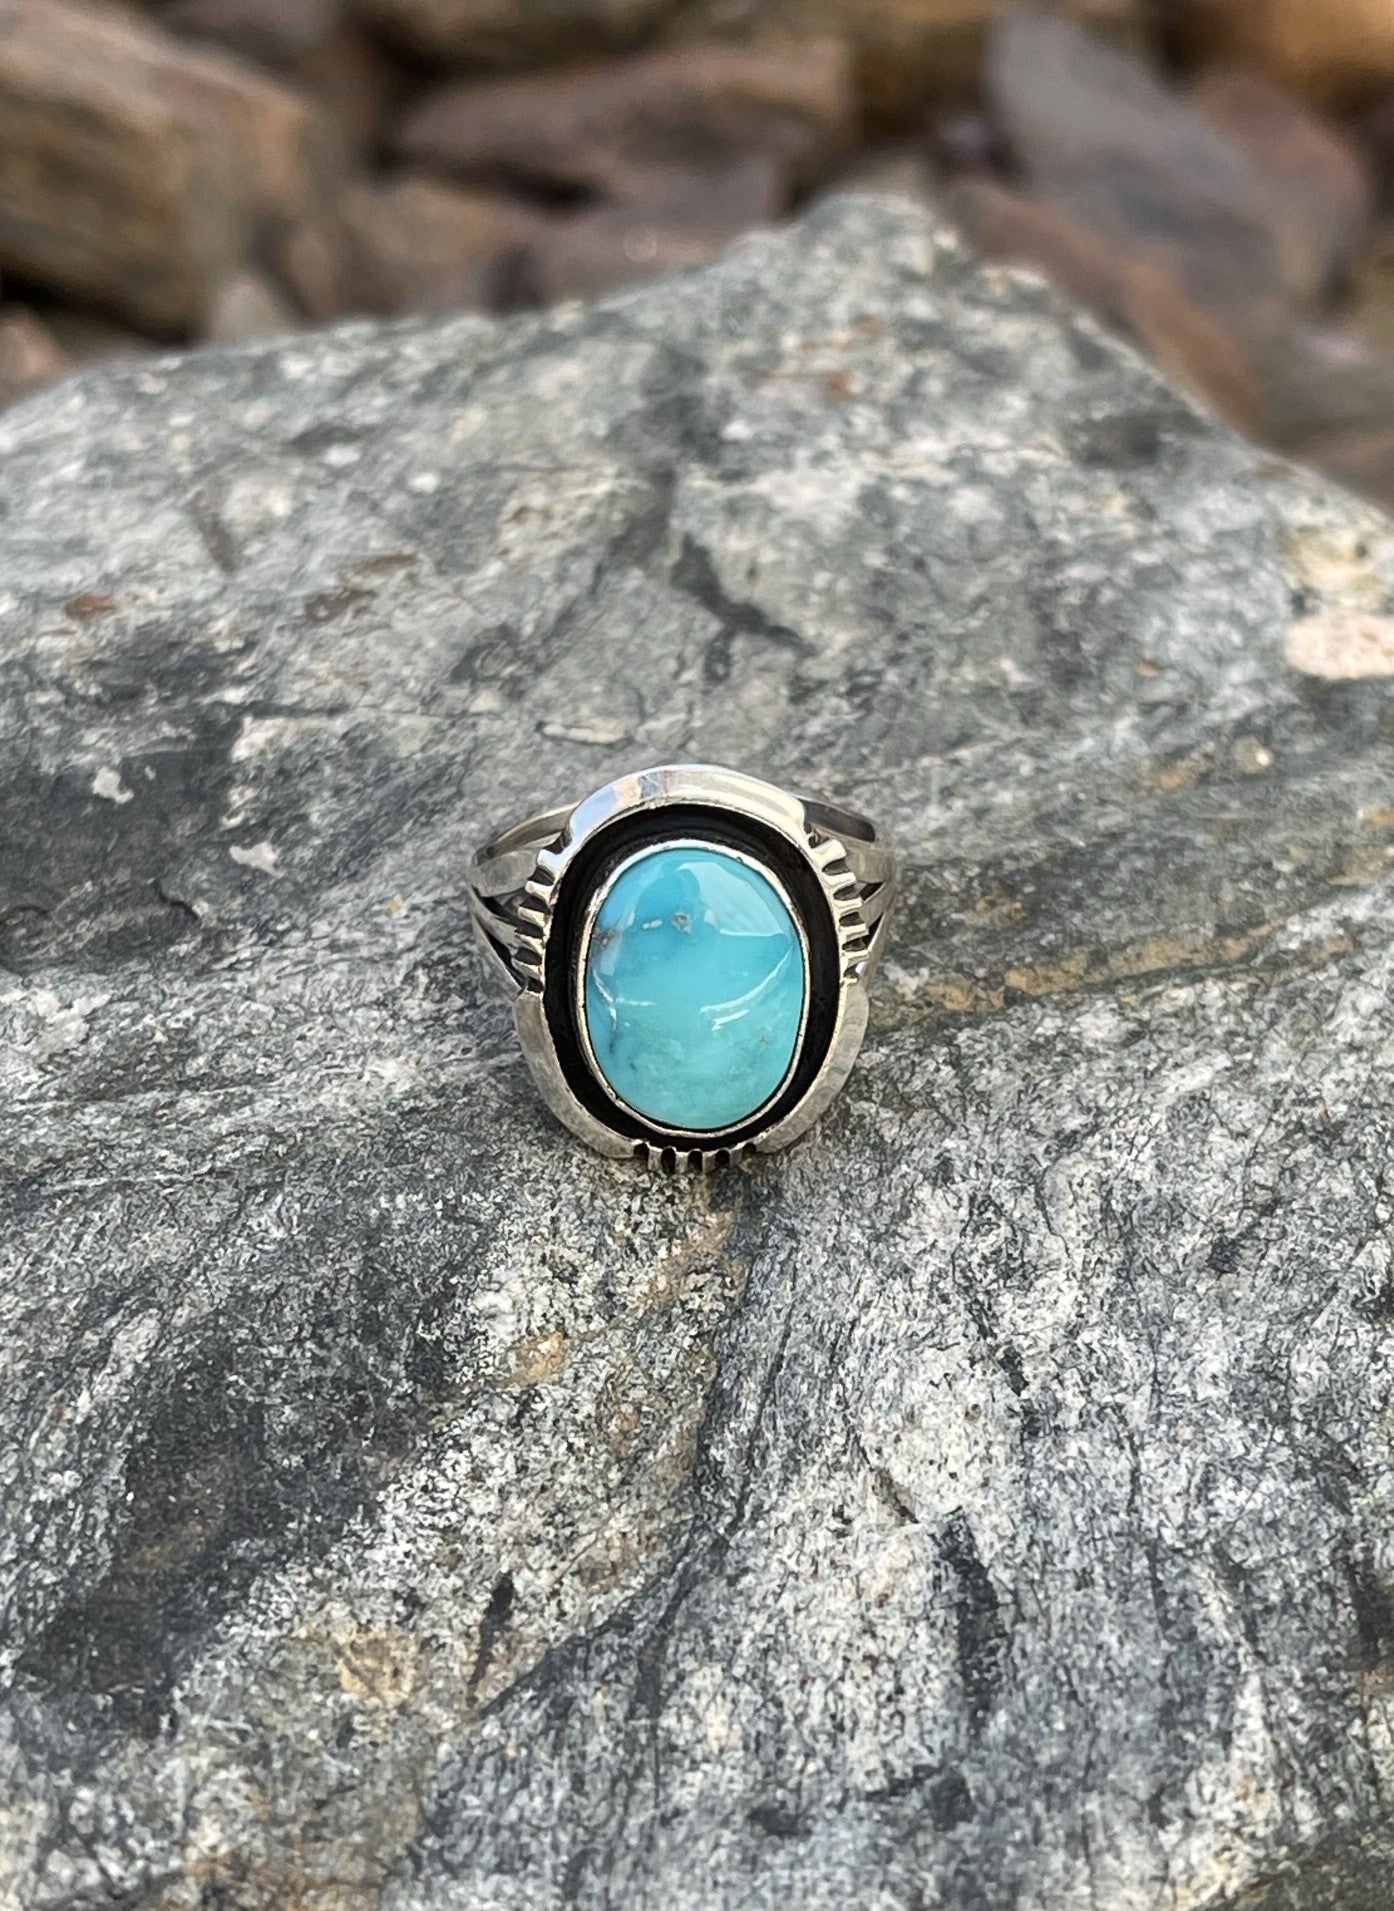 Small Handmade Sterling Silver Kingman Turquoise Ring - Size 6